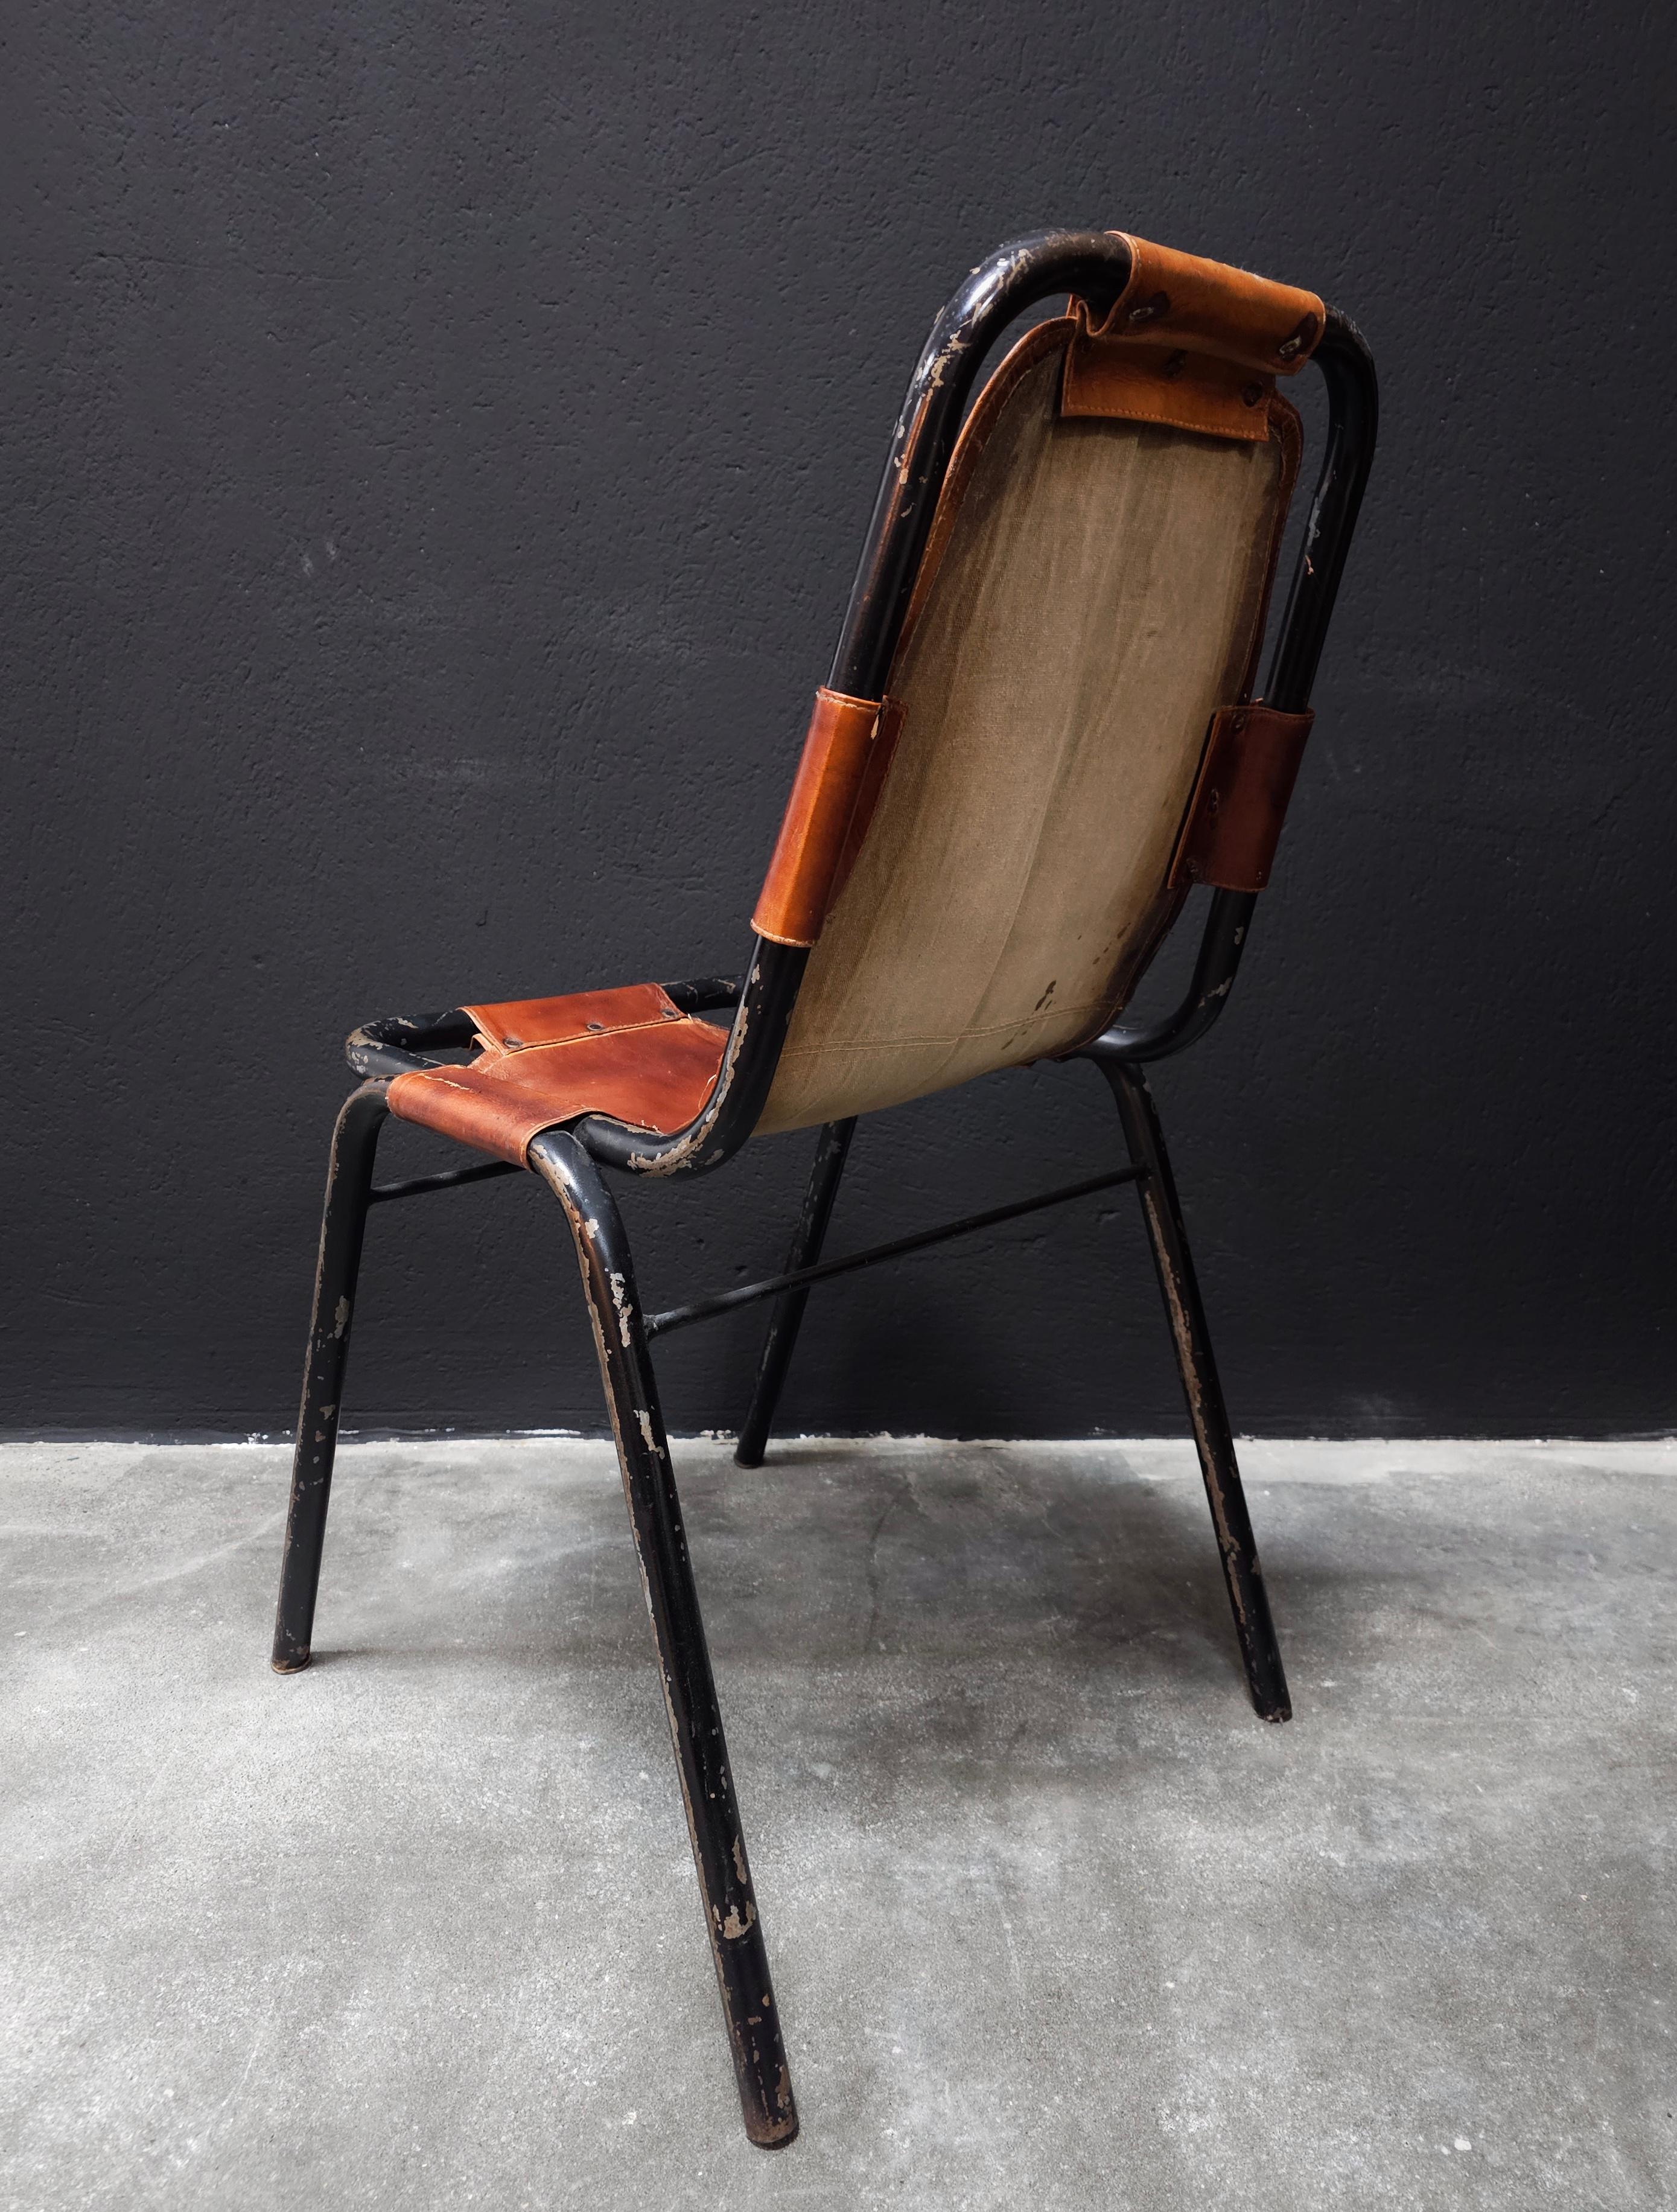 Metal Set of 3 Leather Chairs by DalVera in style of Charlotte Perriand, France, 1950s For Sale